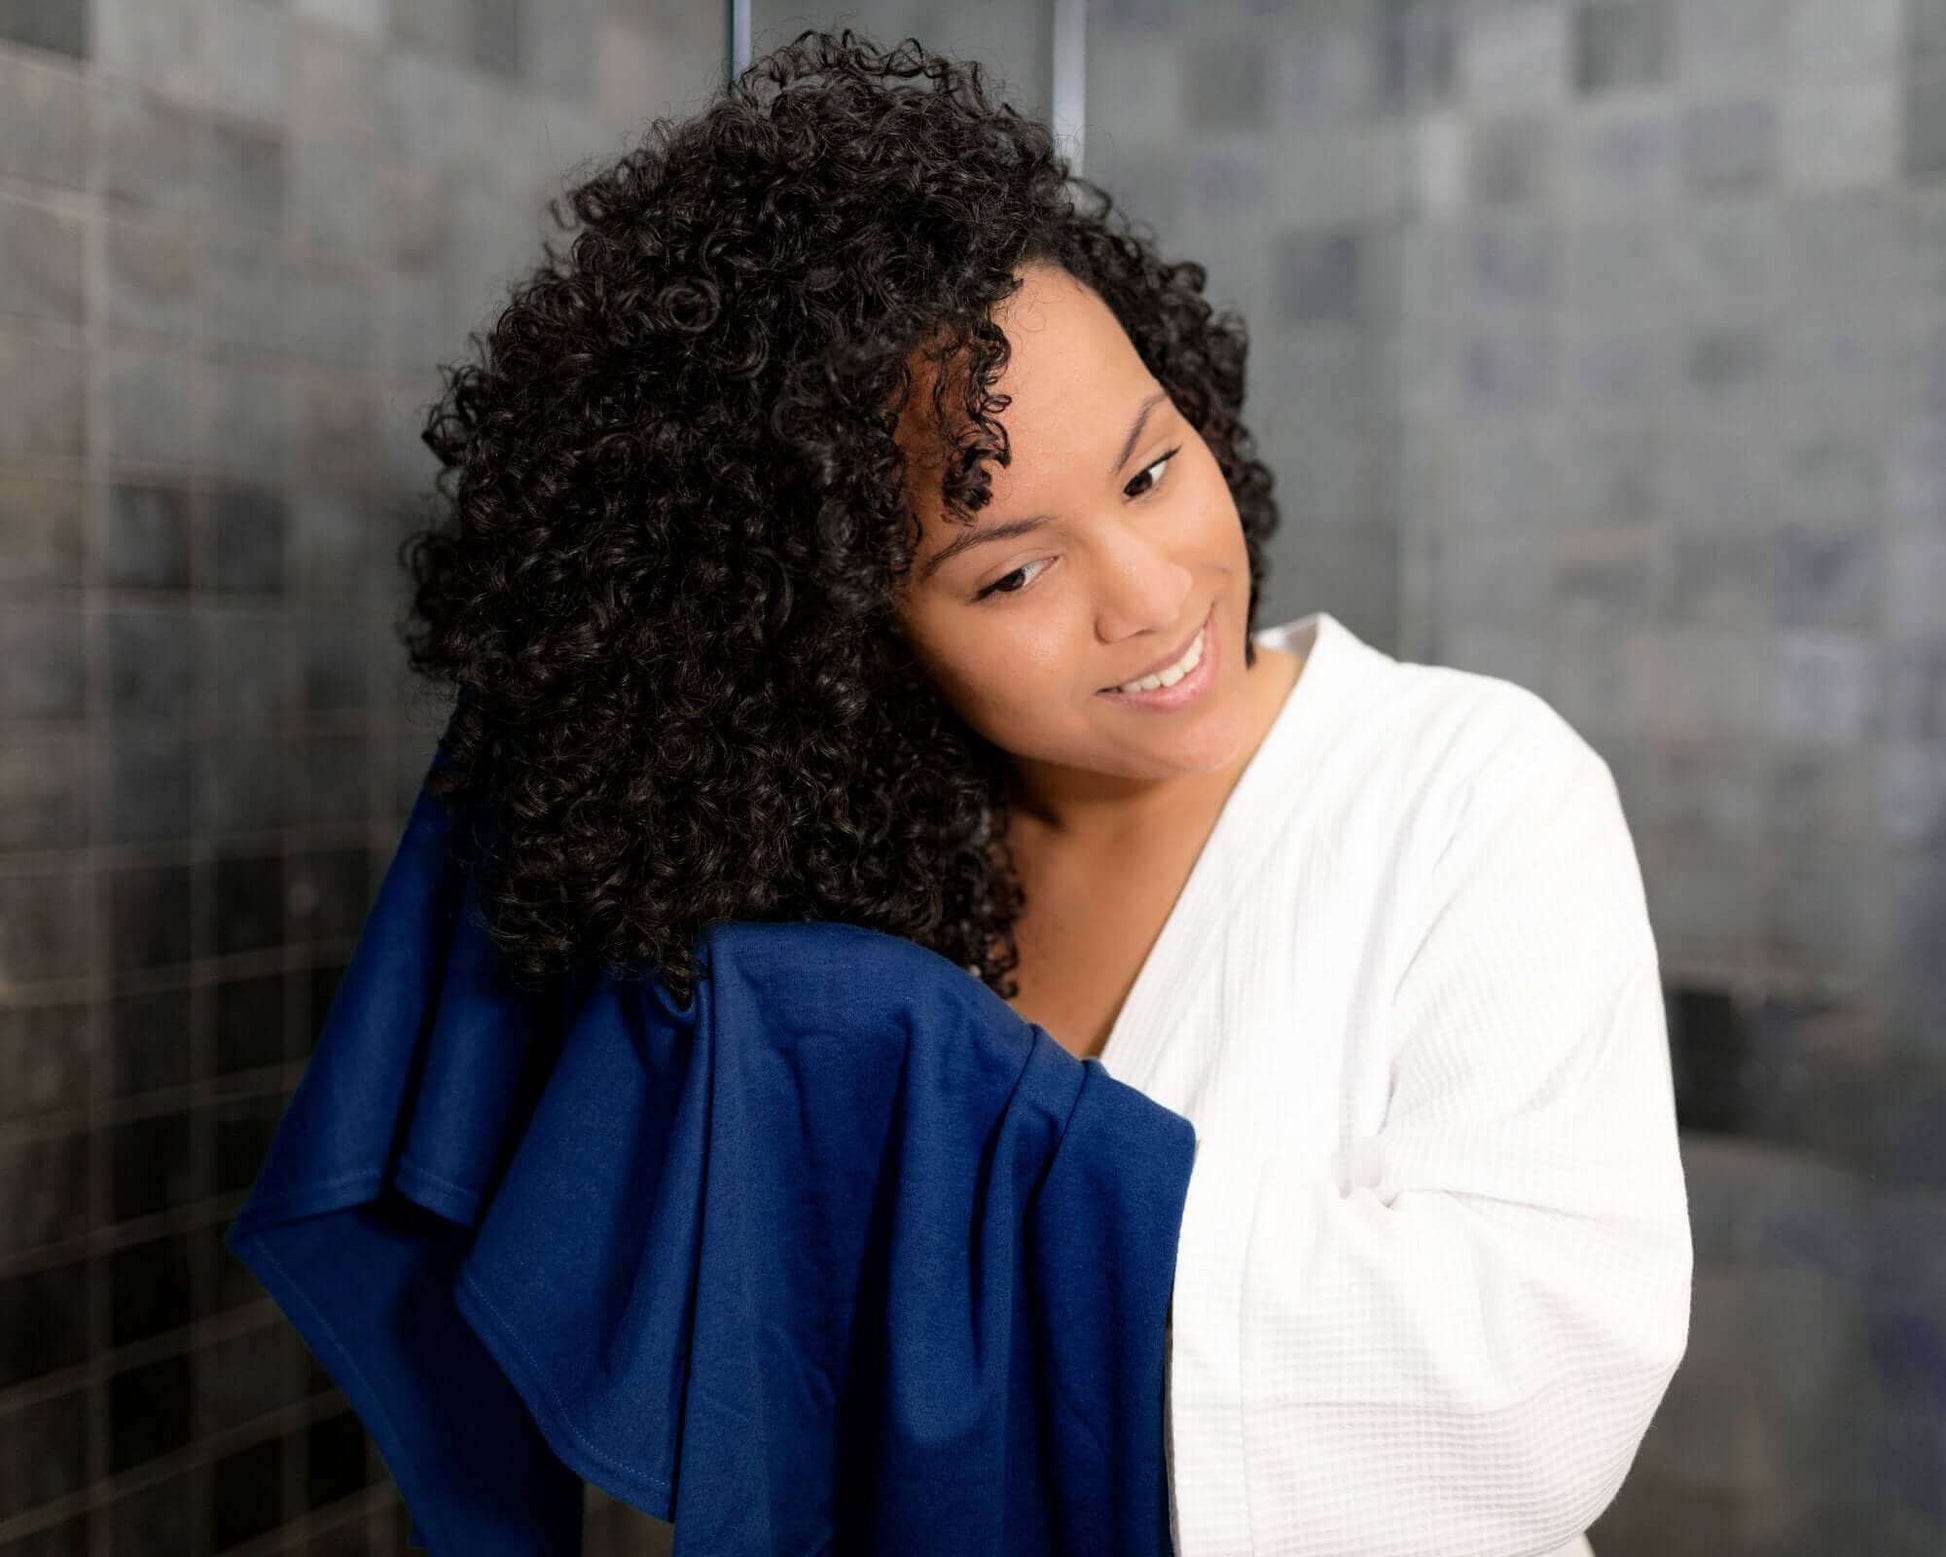 Indigo Blue T-Shirt Hair Towel for Curly, Wavy, and Straight Hair - Soft, Absorbent, and Eco-Friendly